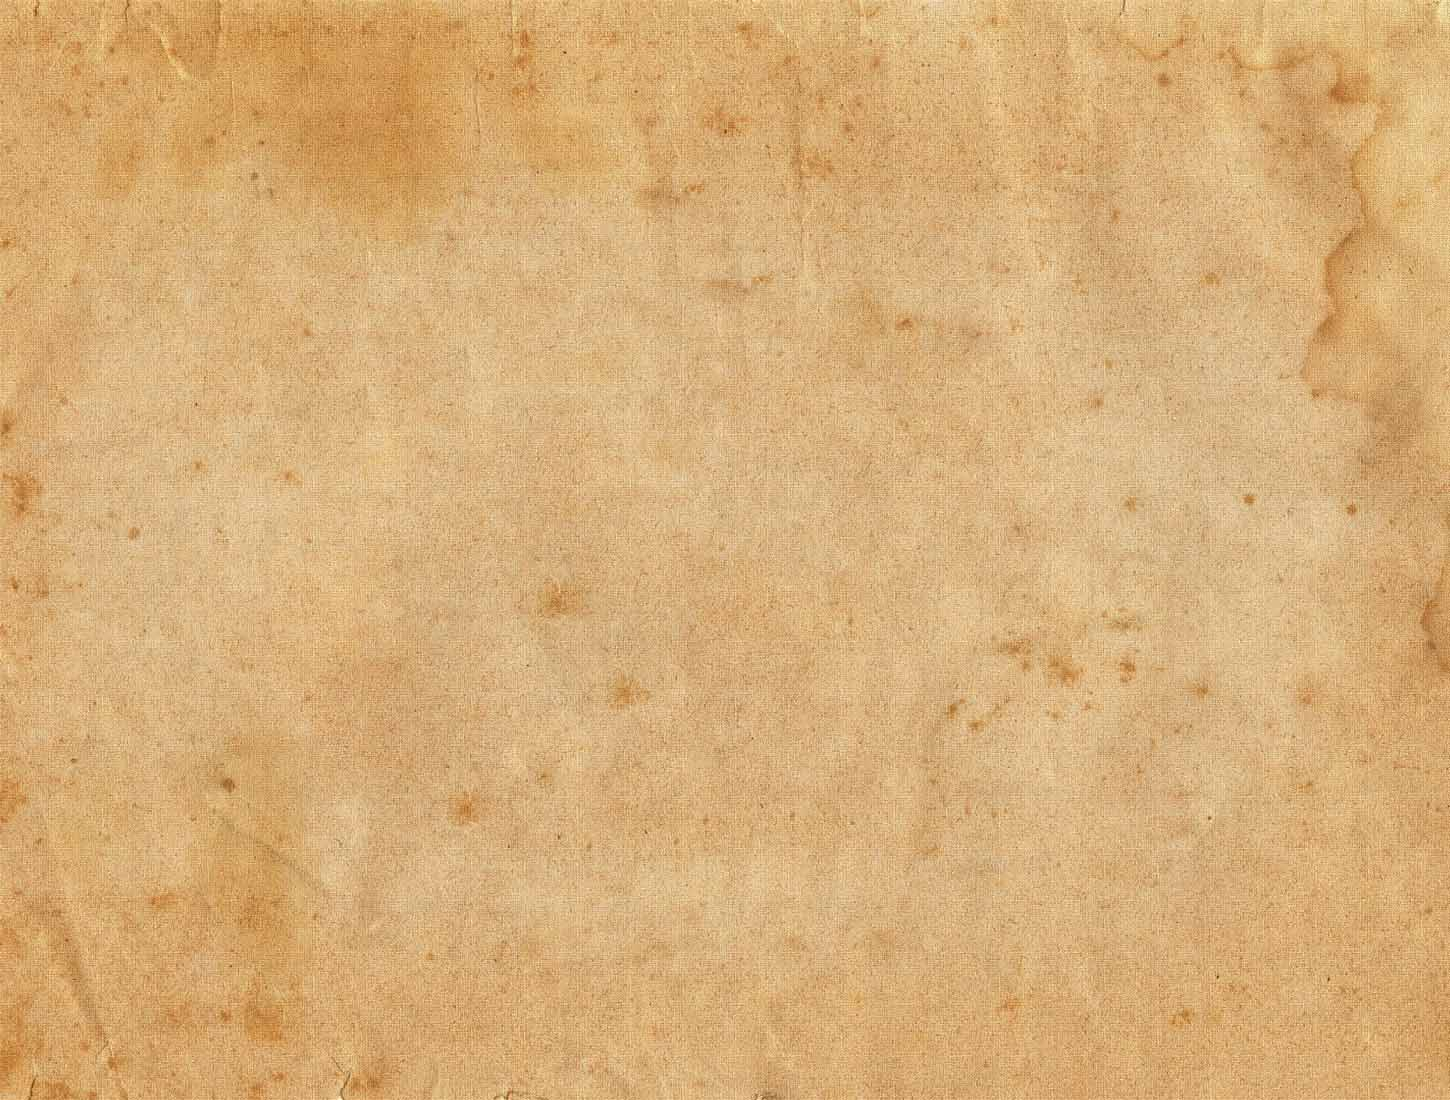 Old Beige Blank Paper Free Ppt Backgrounds For Your Pertaining To Blank Old Newspaper Template